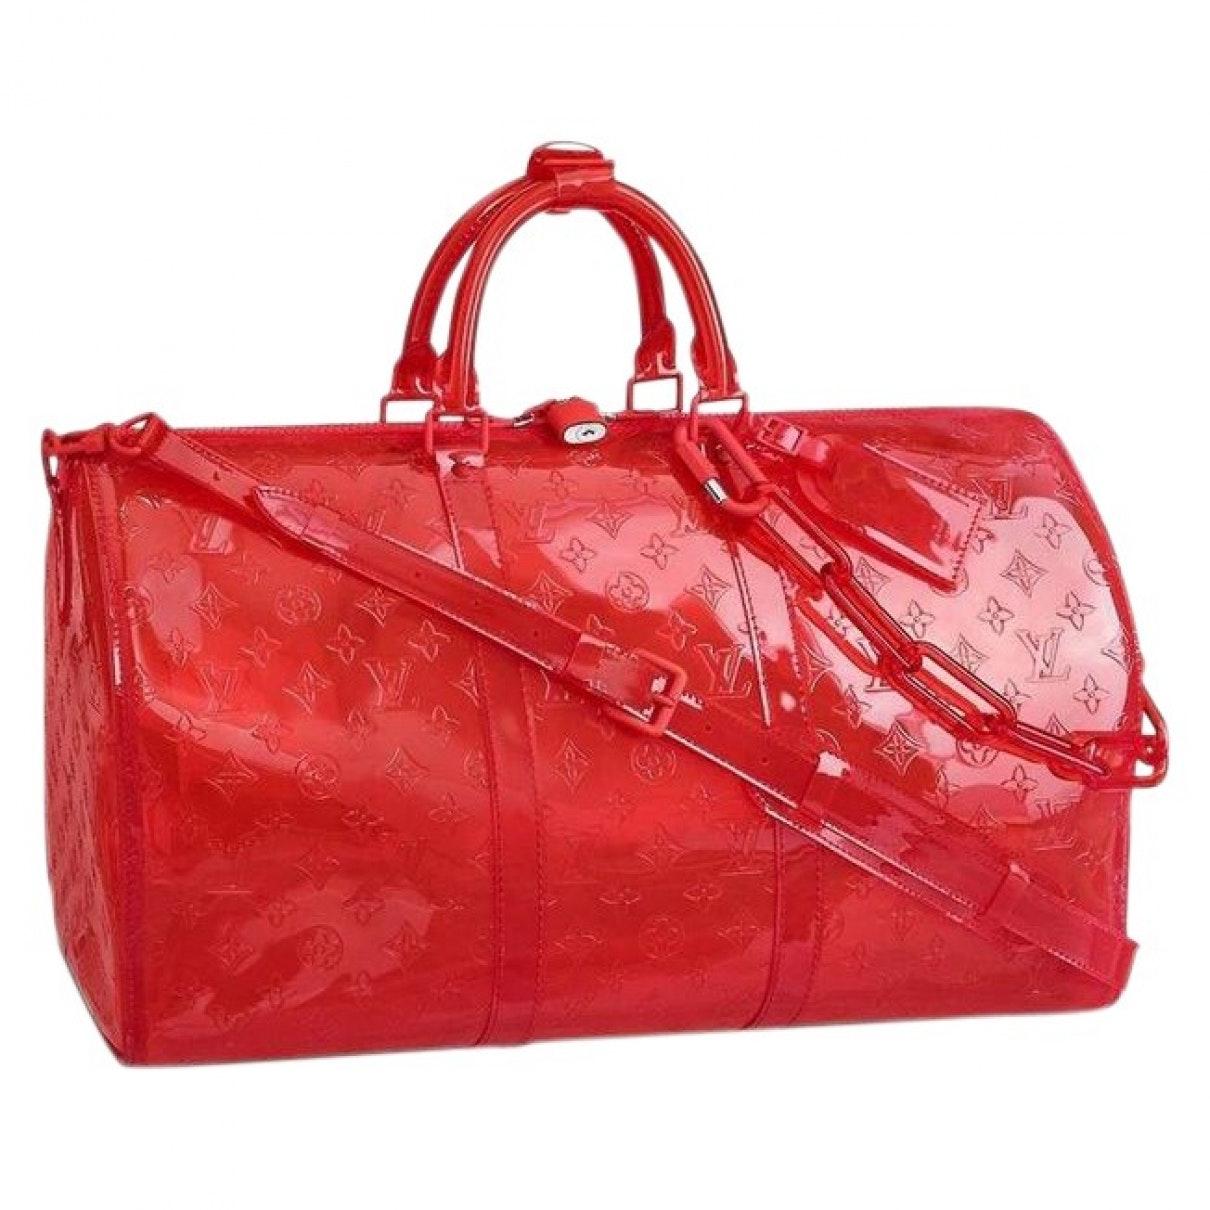 Louis Vuitton Keepall Prism Red Plastic Bag for Men - Lyst